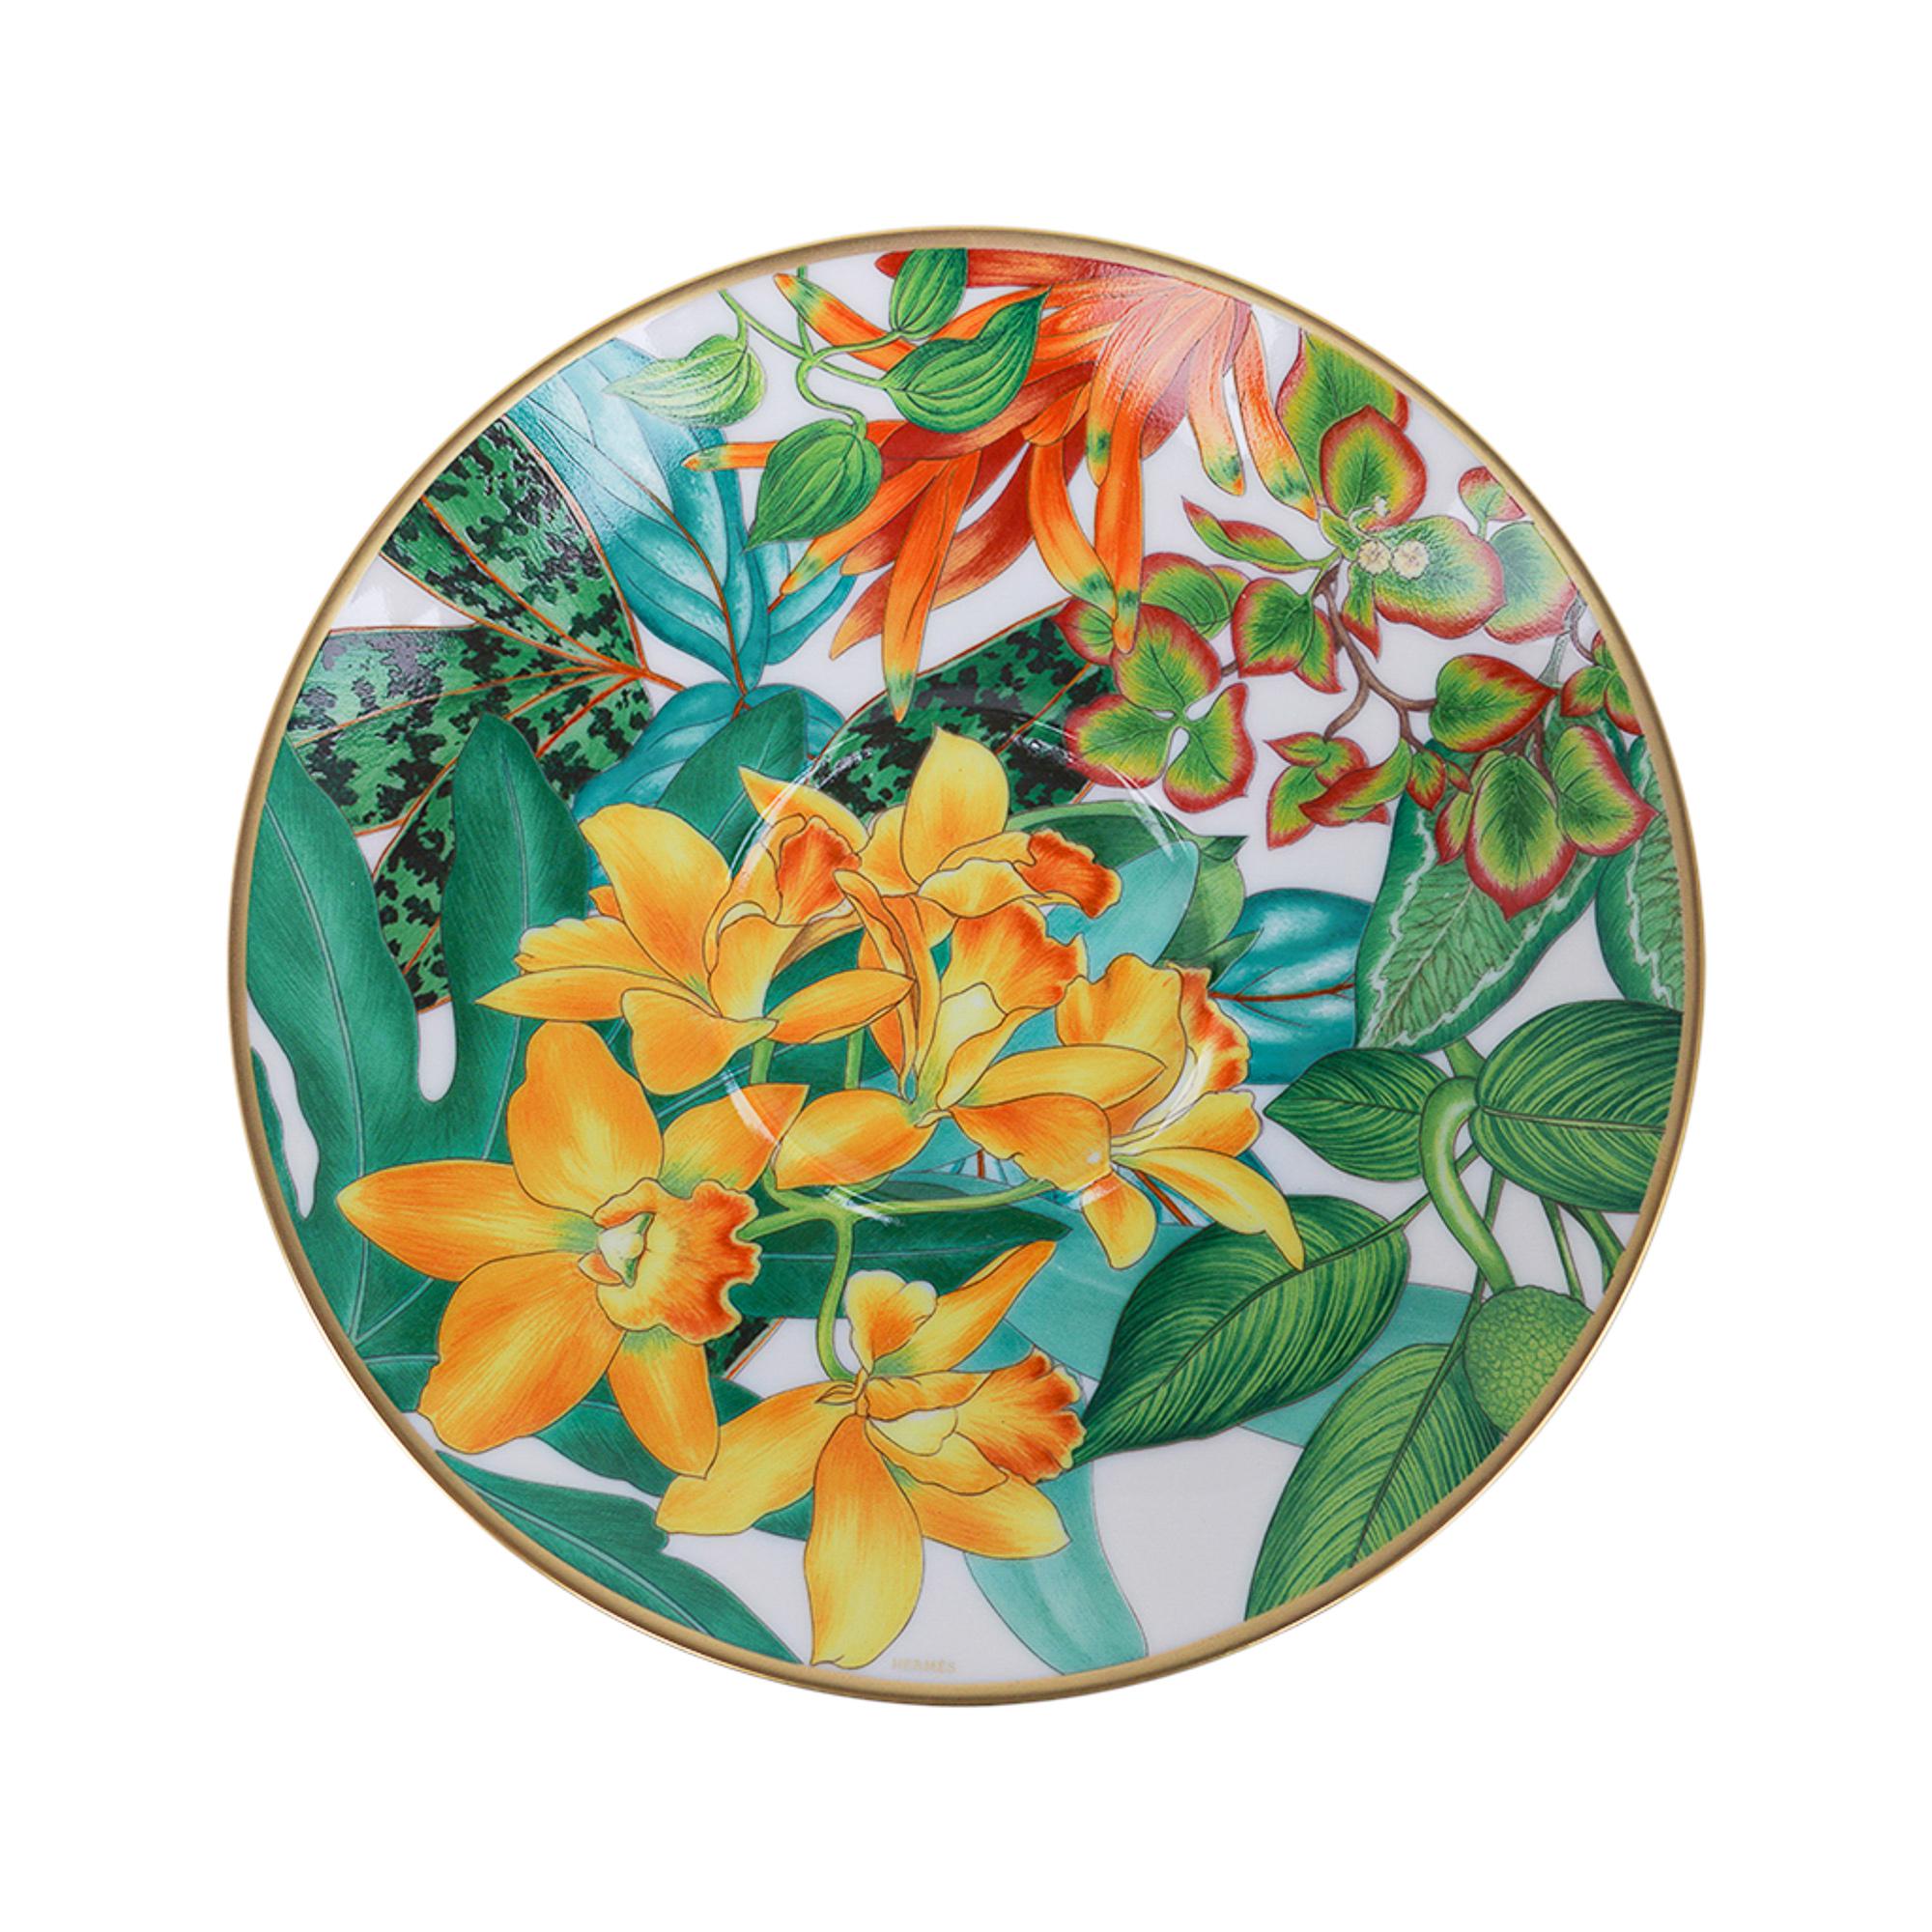 Mightychic offers an Hermes Tea Cup and Saucer set of two (2) featured in the classic Hermes Passifolia pattern.
A beautiful hommage to the peace and power of flora.
Decorated using Chromolithography.
Hand-painted 24K gold trim.
Beautiful tea cup